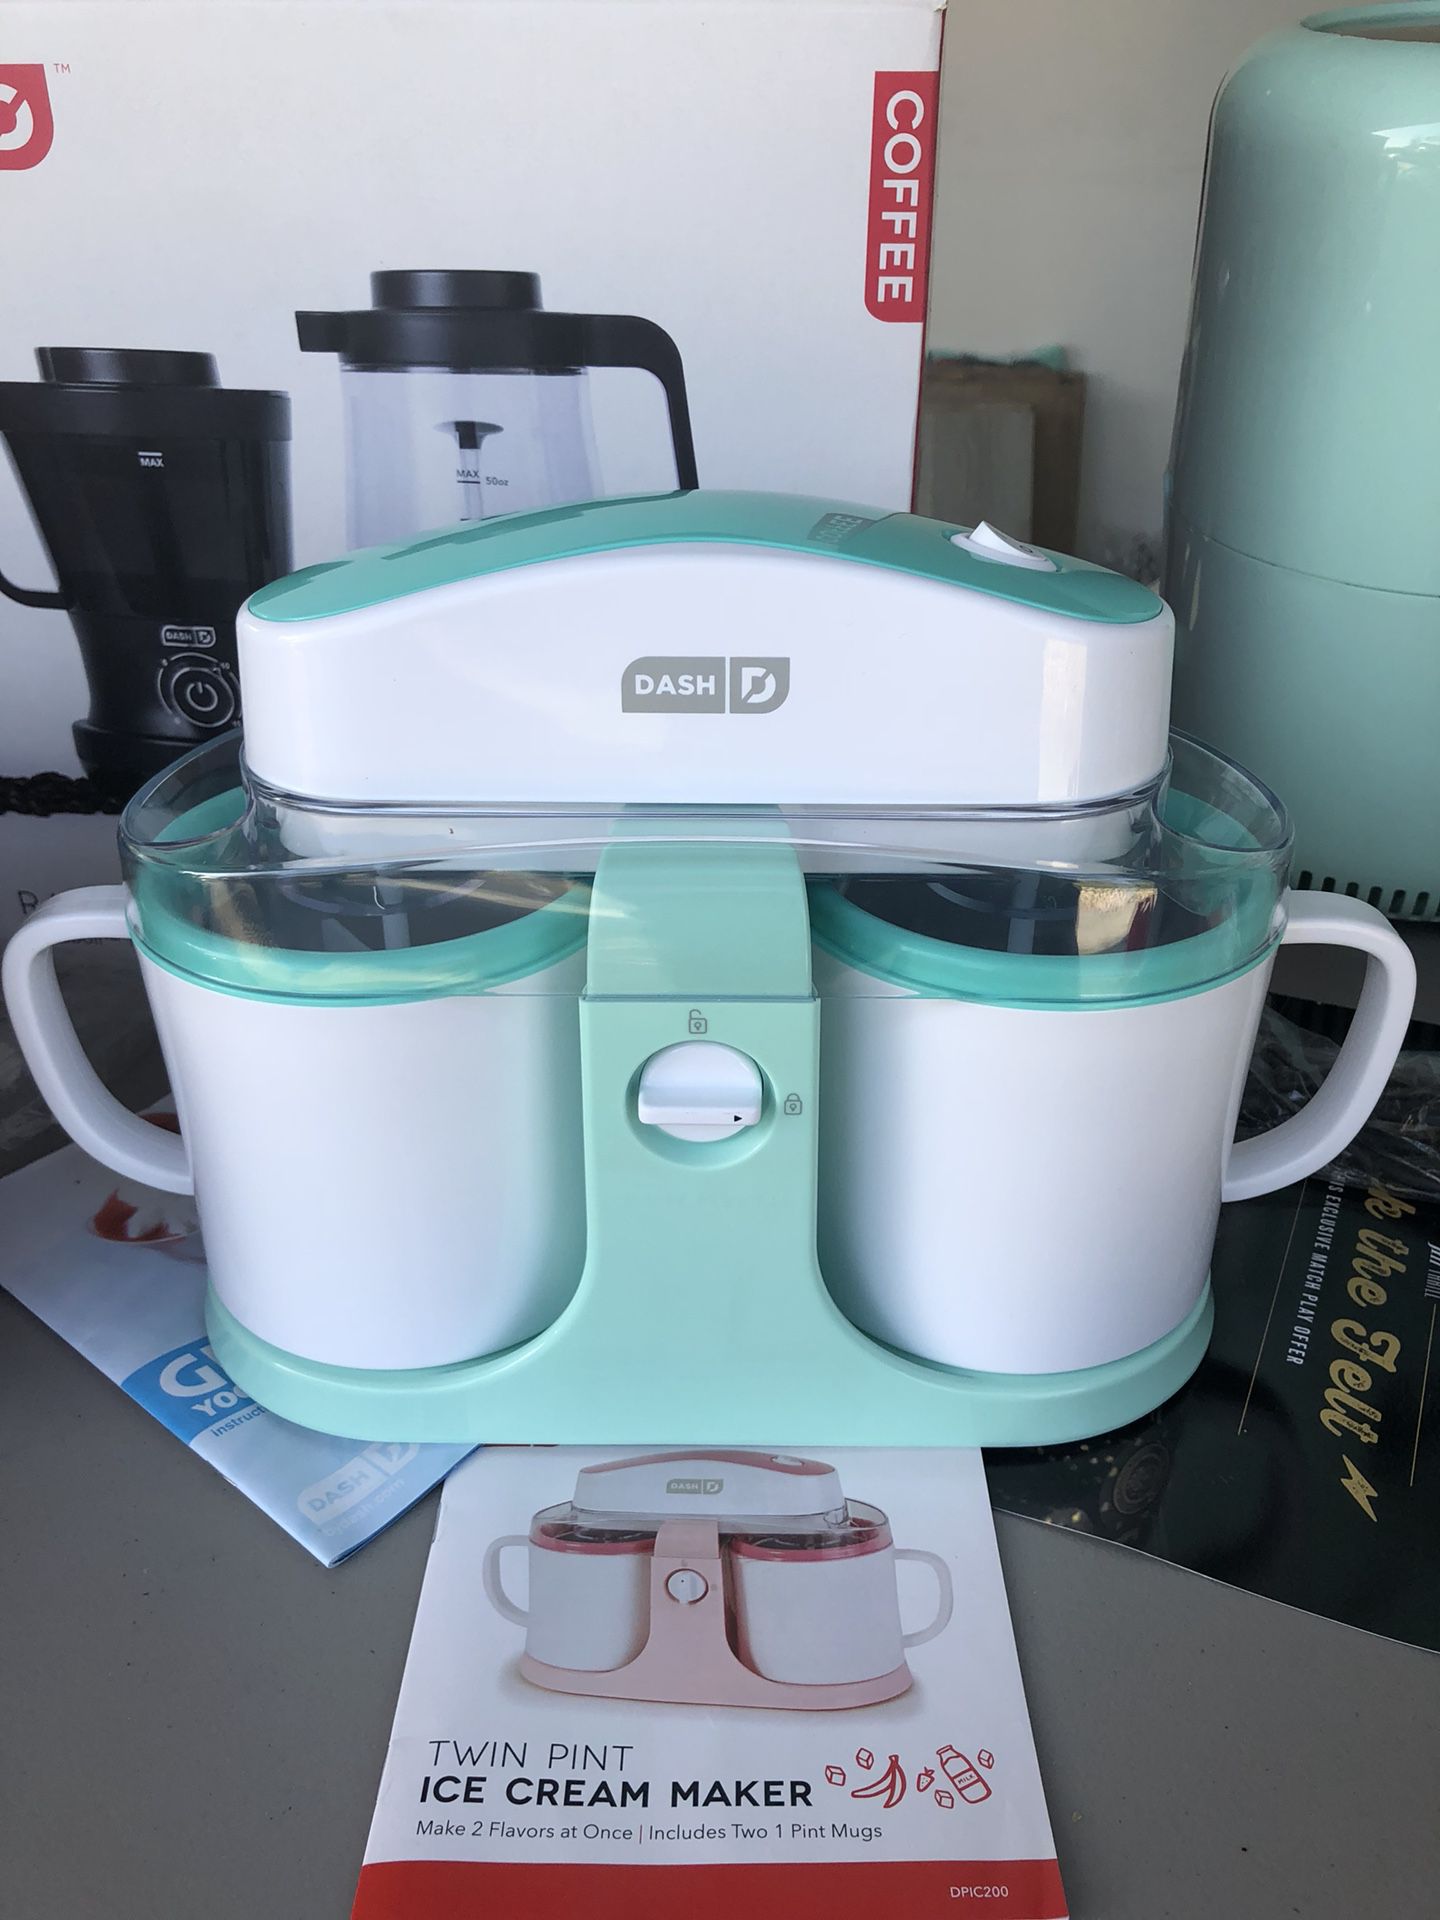 Twin pint ice cream maker for Sale in Bloomington, CA - OfferUp